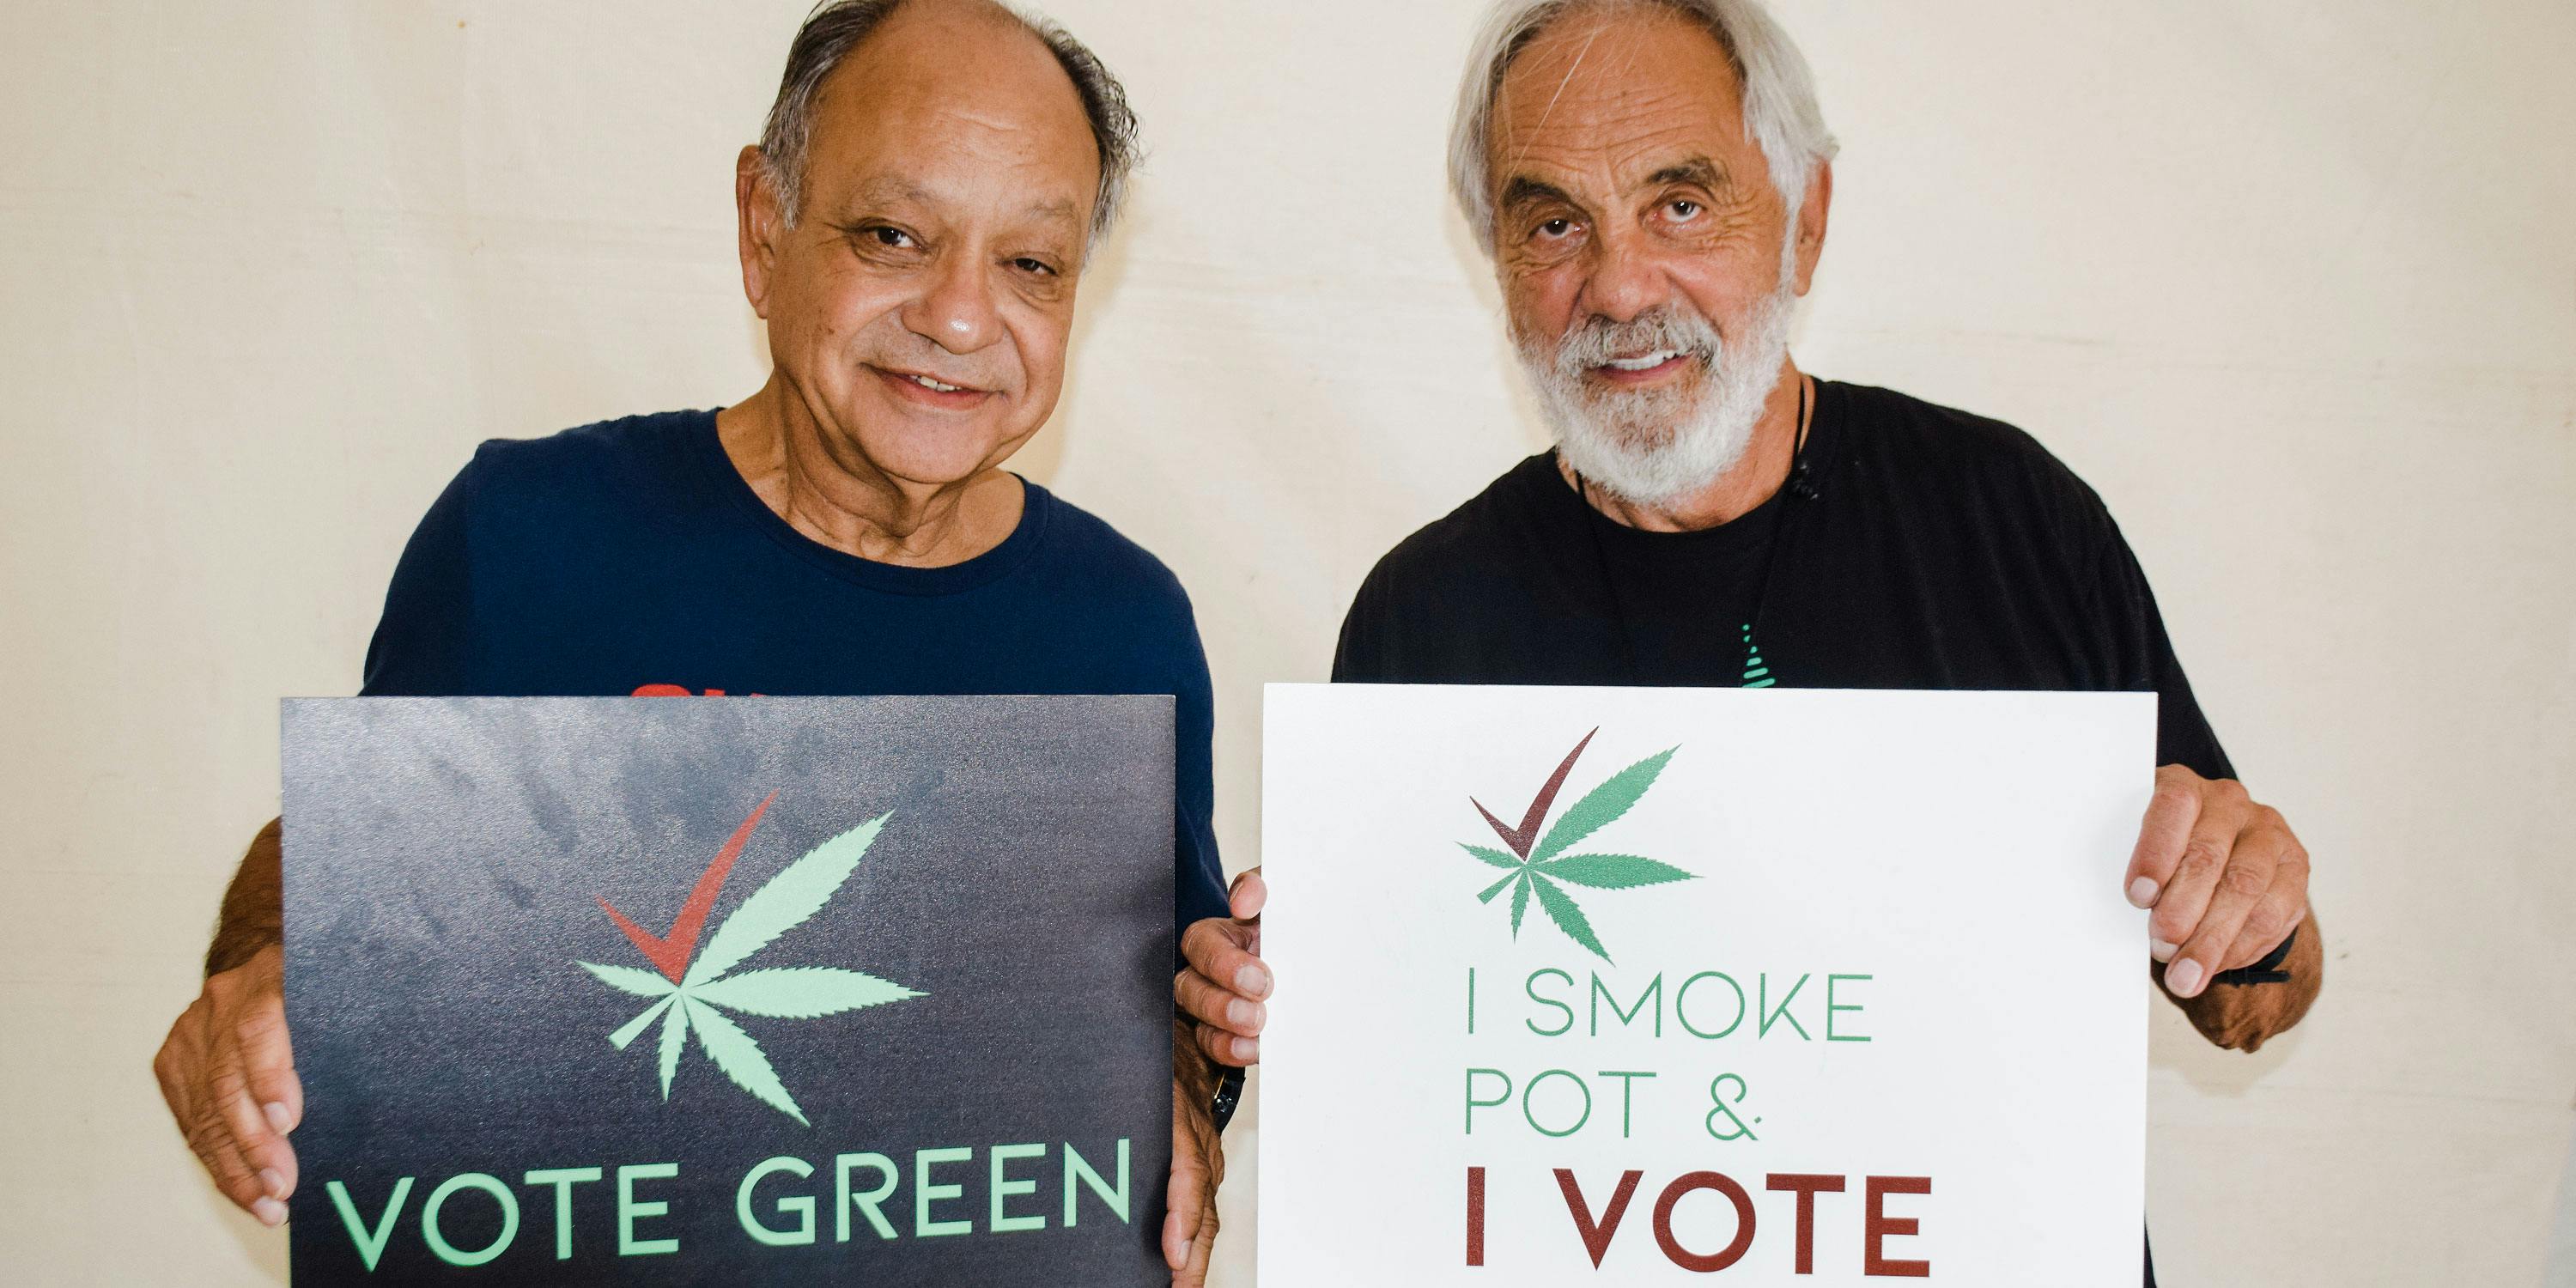 Cheech and Chong endorse the Cannabis Voter Project